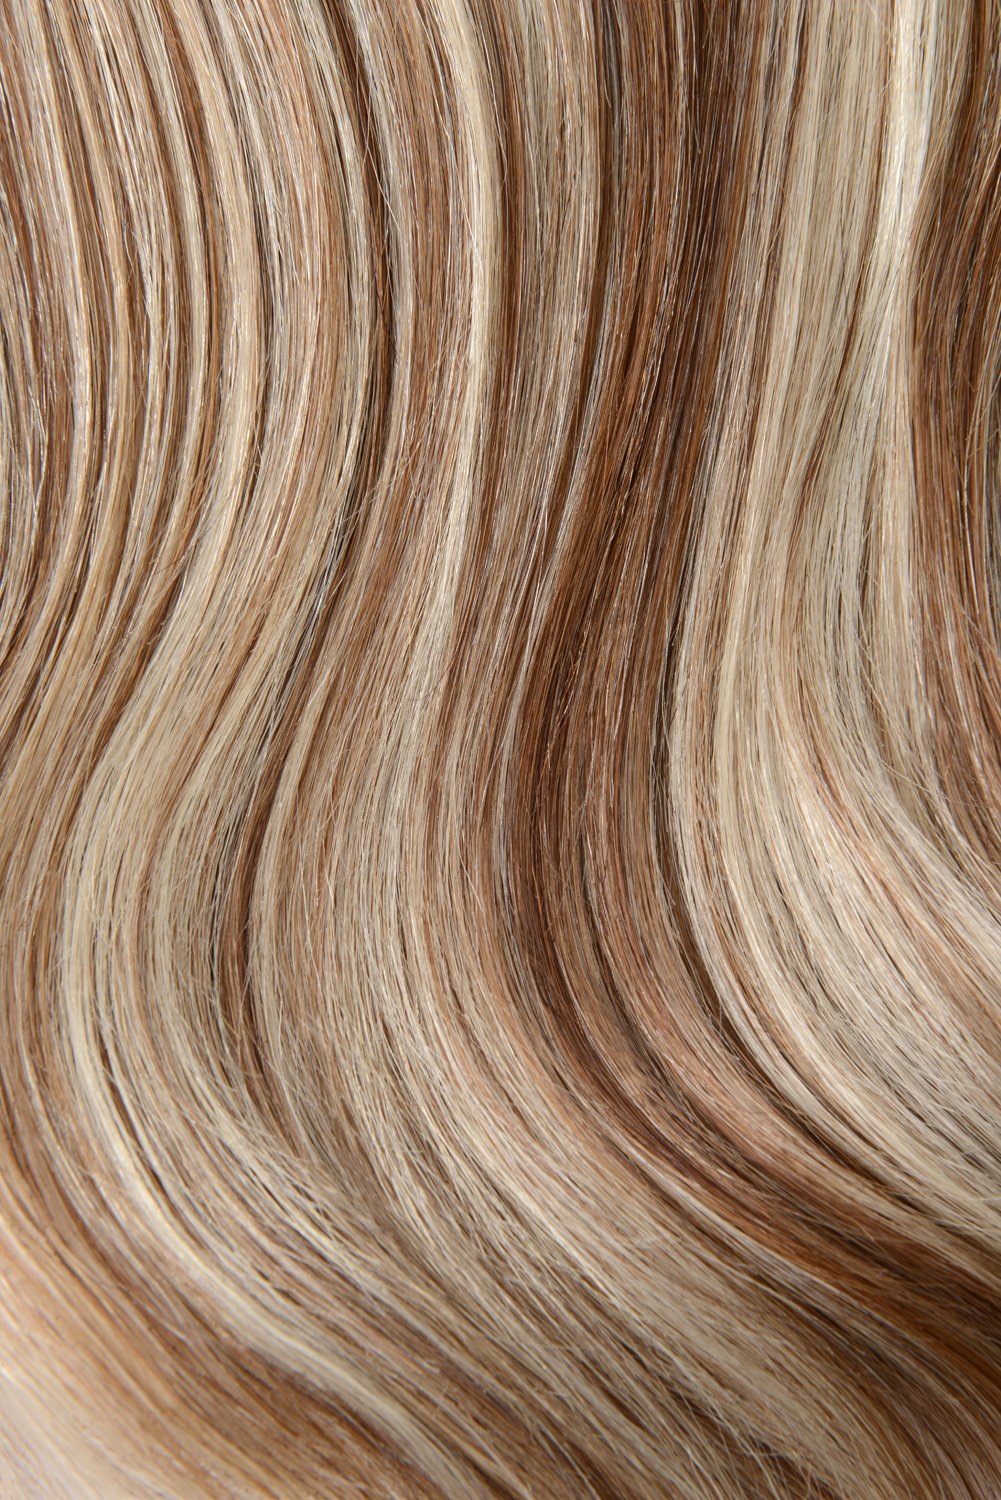 Double Wefted Full Head Remy Clip in Human Hair Extensions - Chestnut Bronde (#6/613)